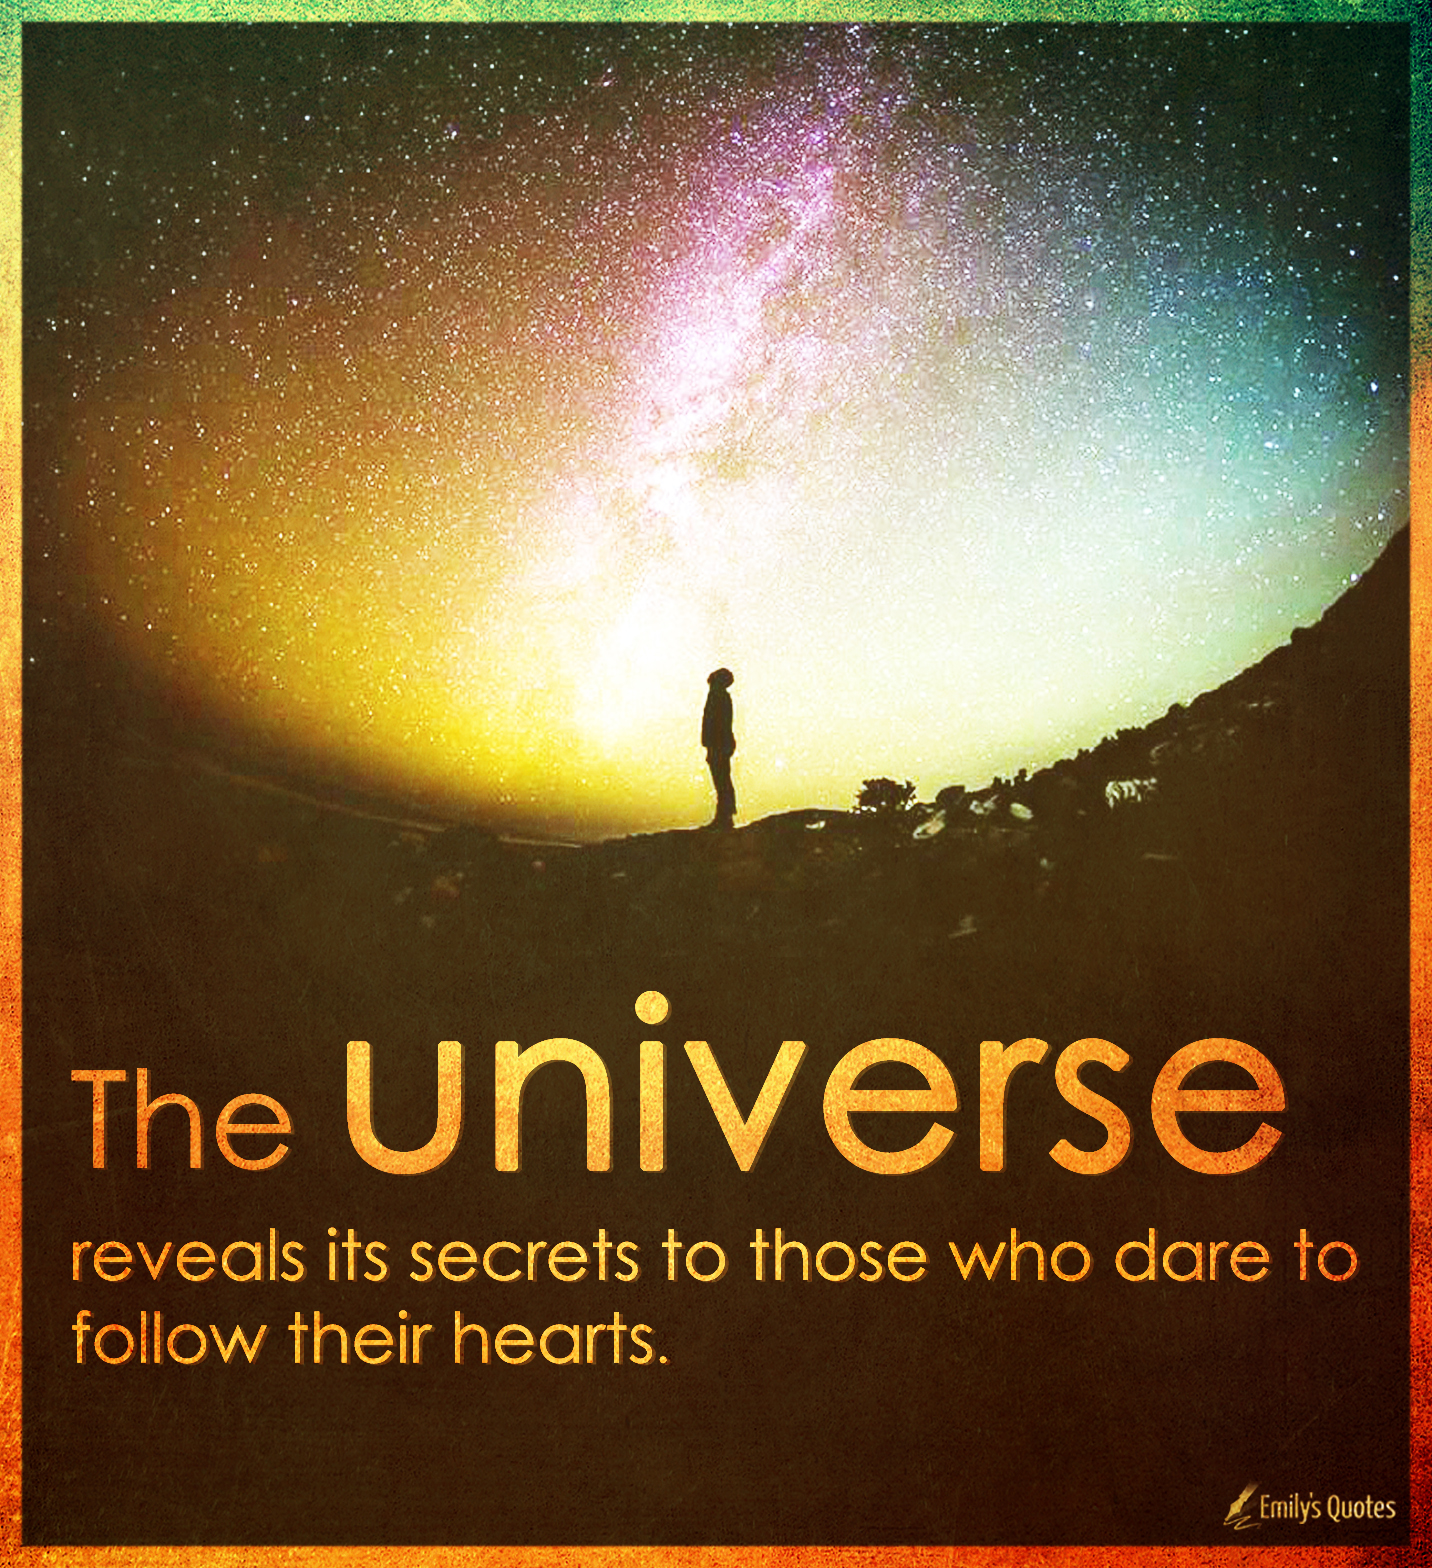 The universe reveals its secrets to those who dare to follow their hearts